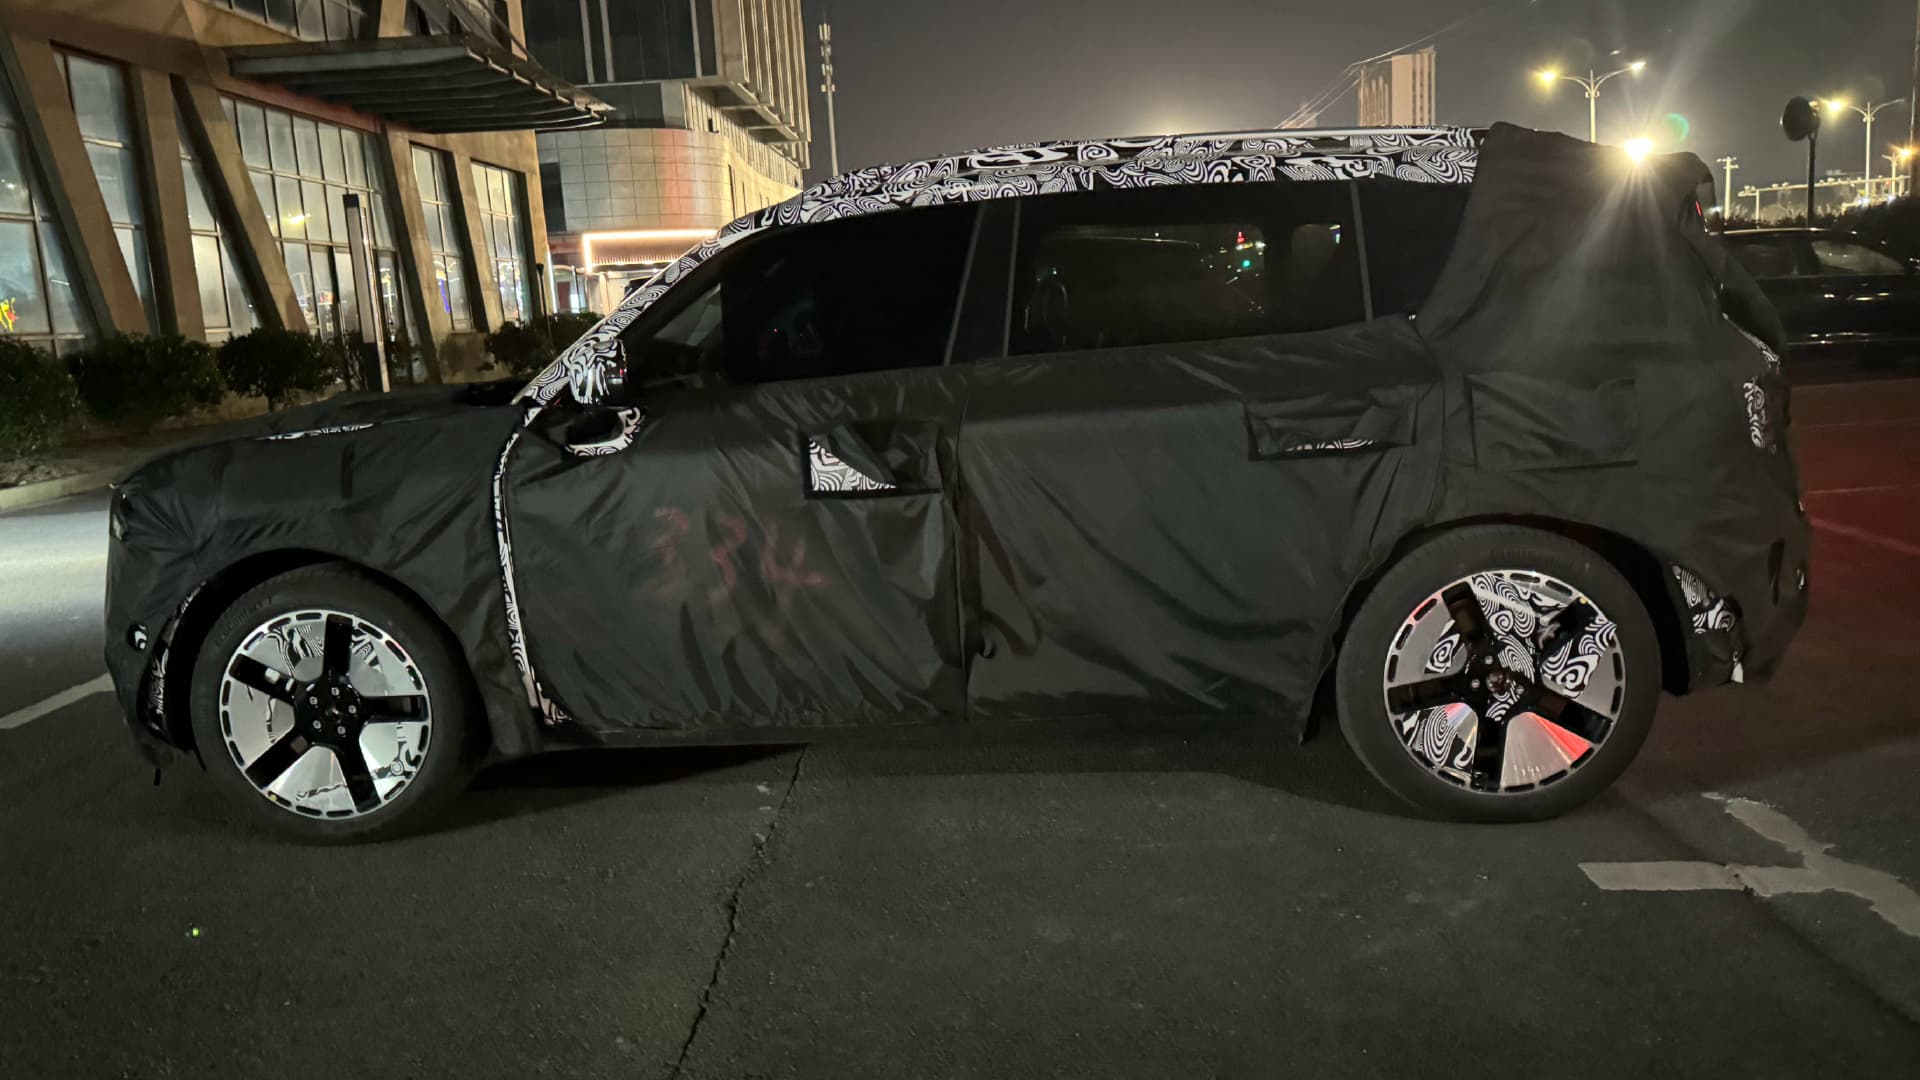 Smart HY11 minivan was spotted in China as it gets closer to launch